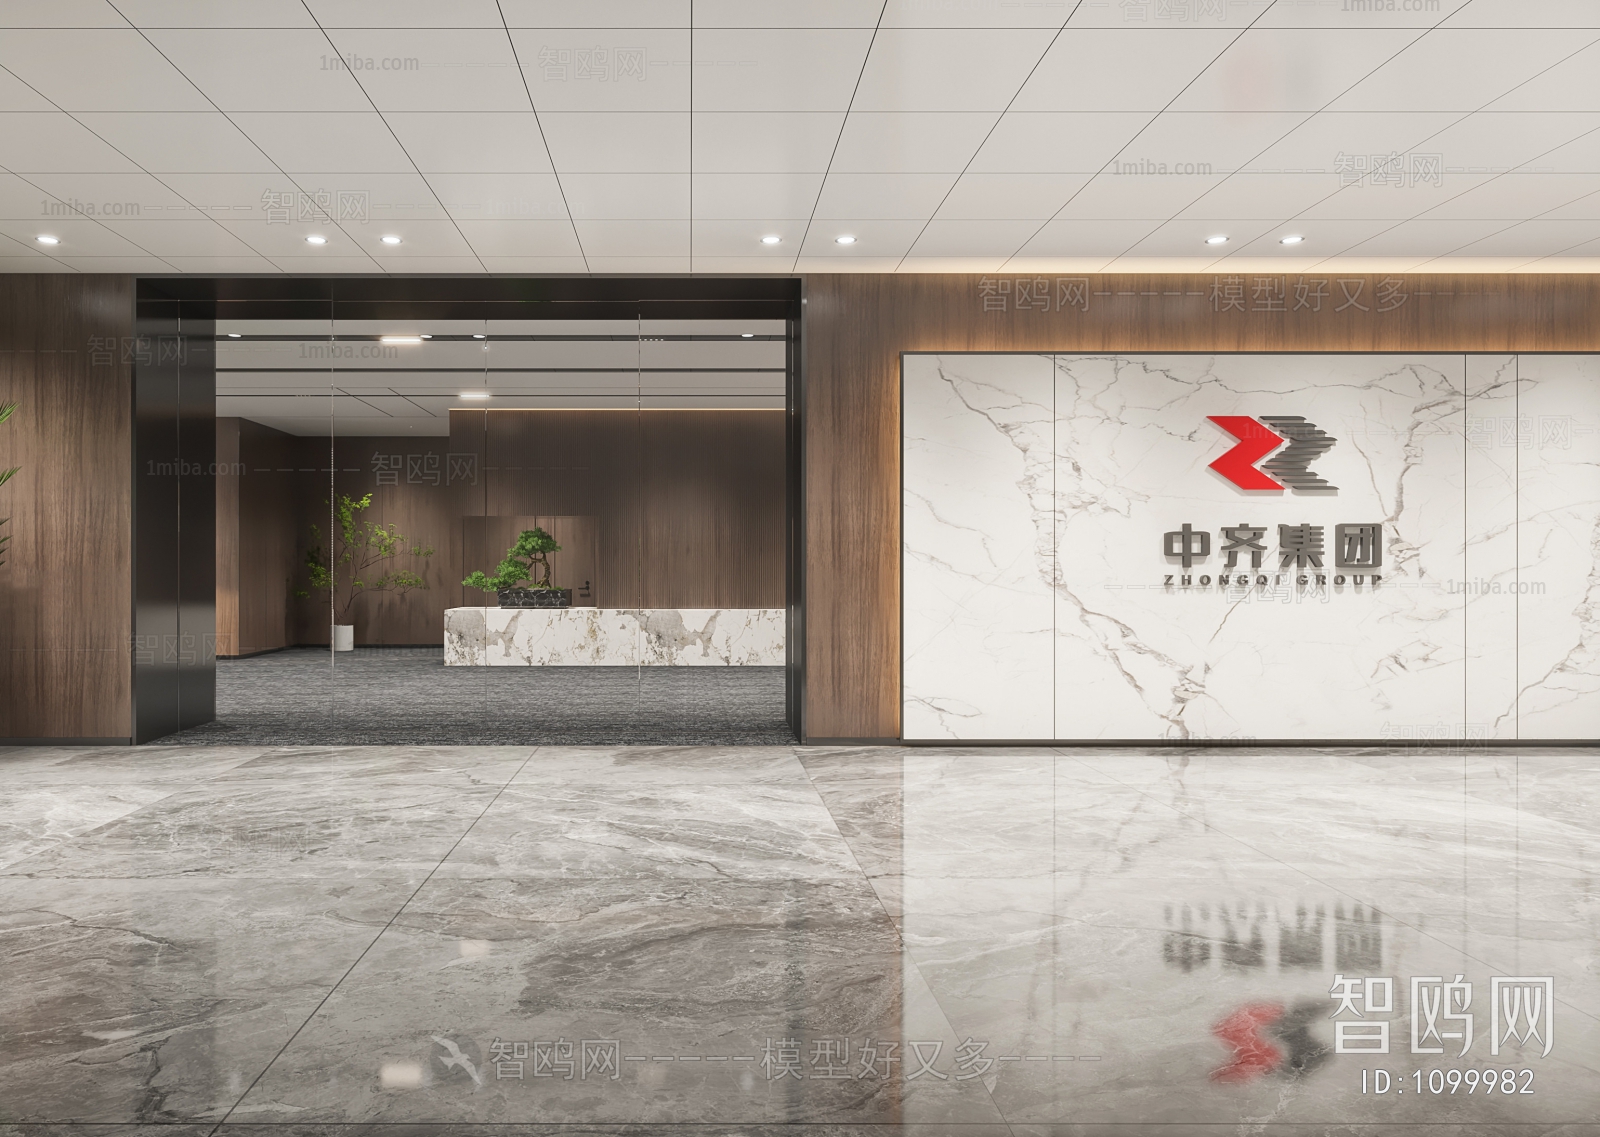 New Chinese Style Office Reception Desk